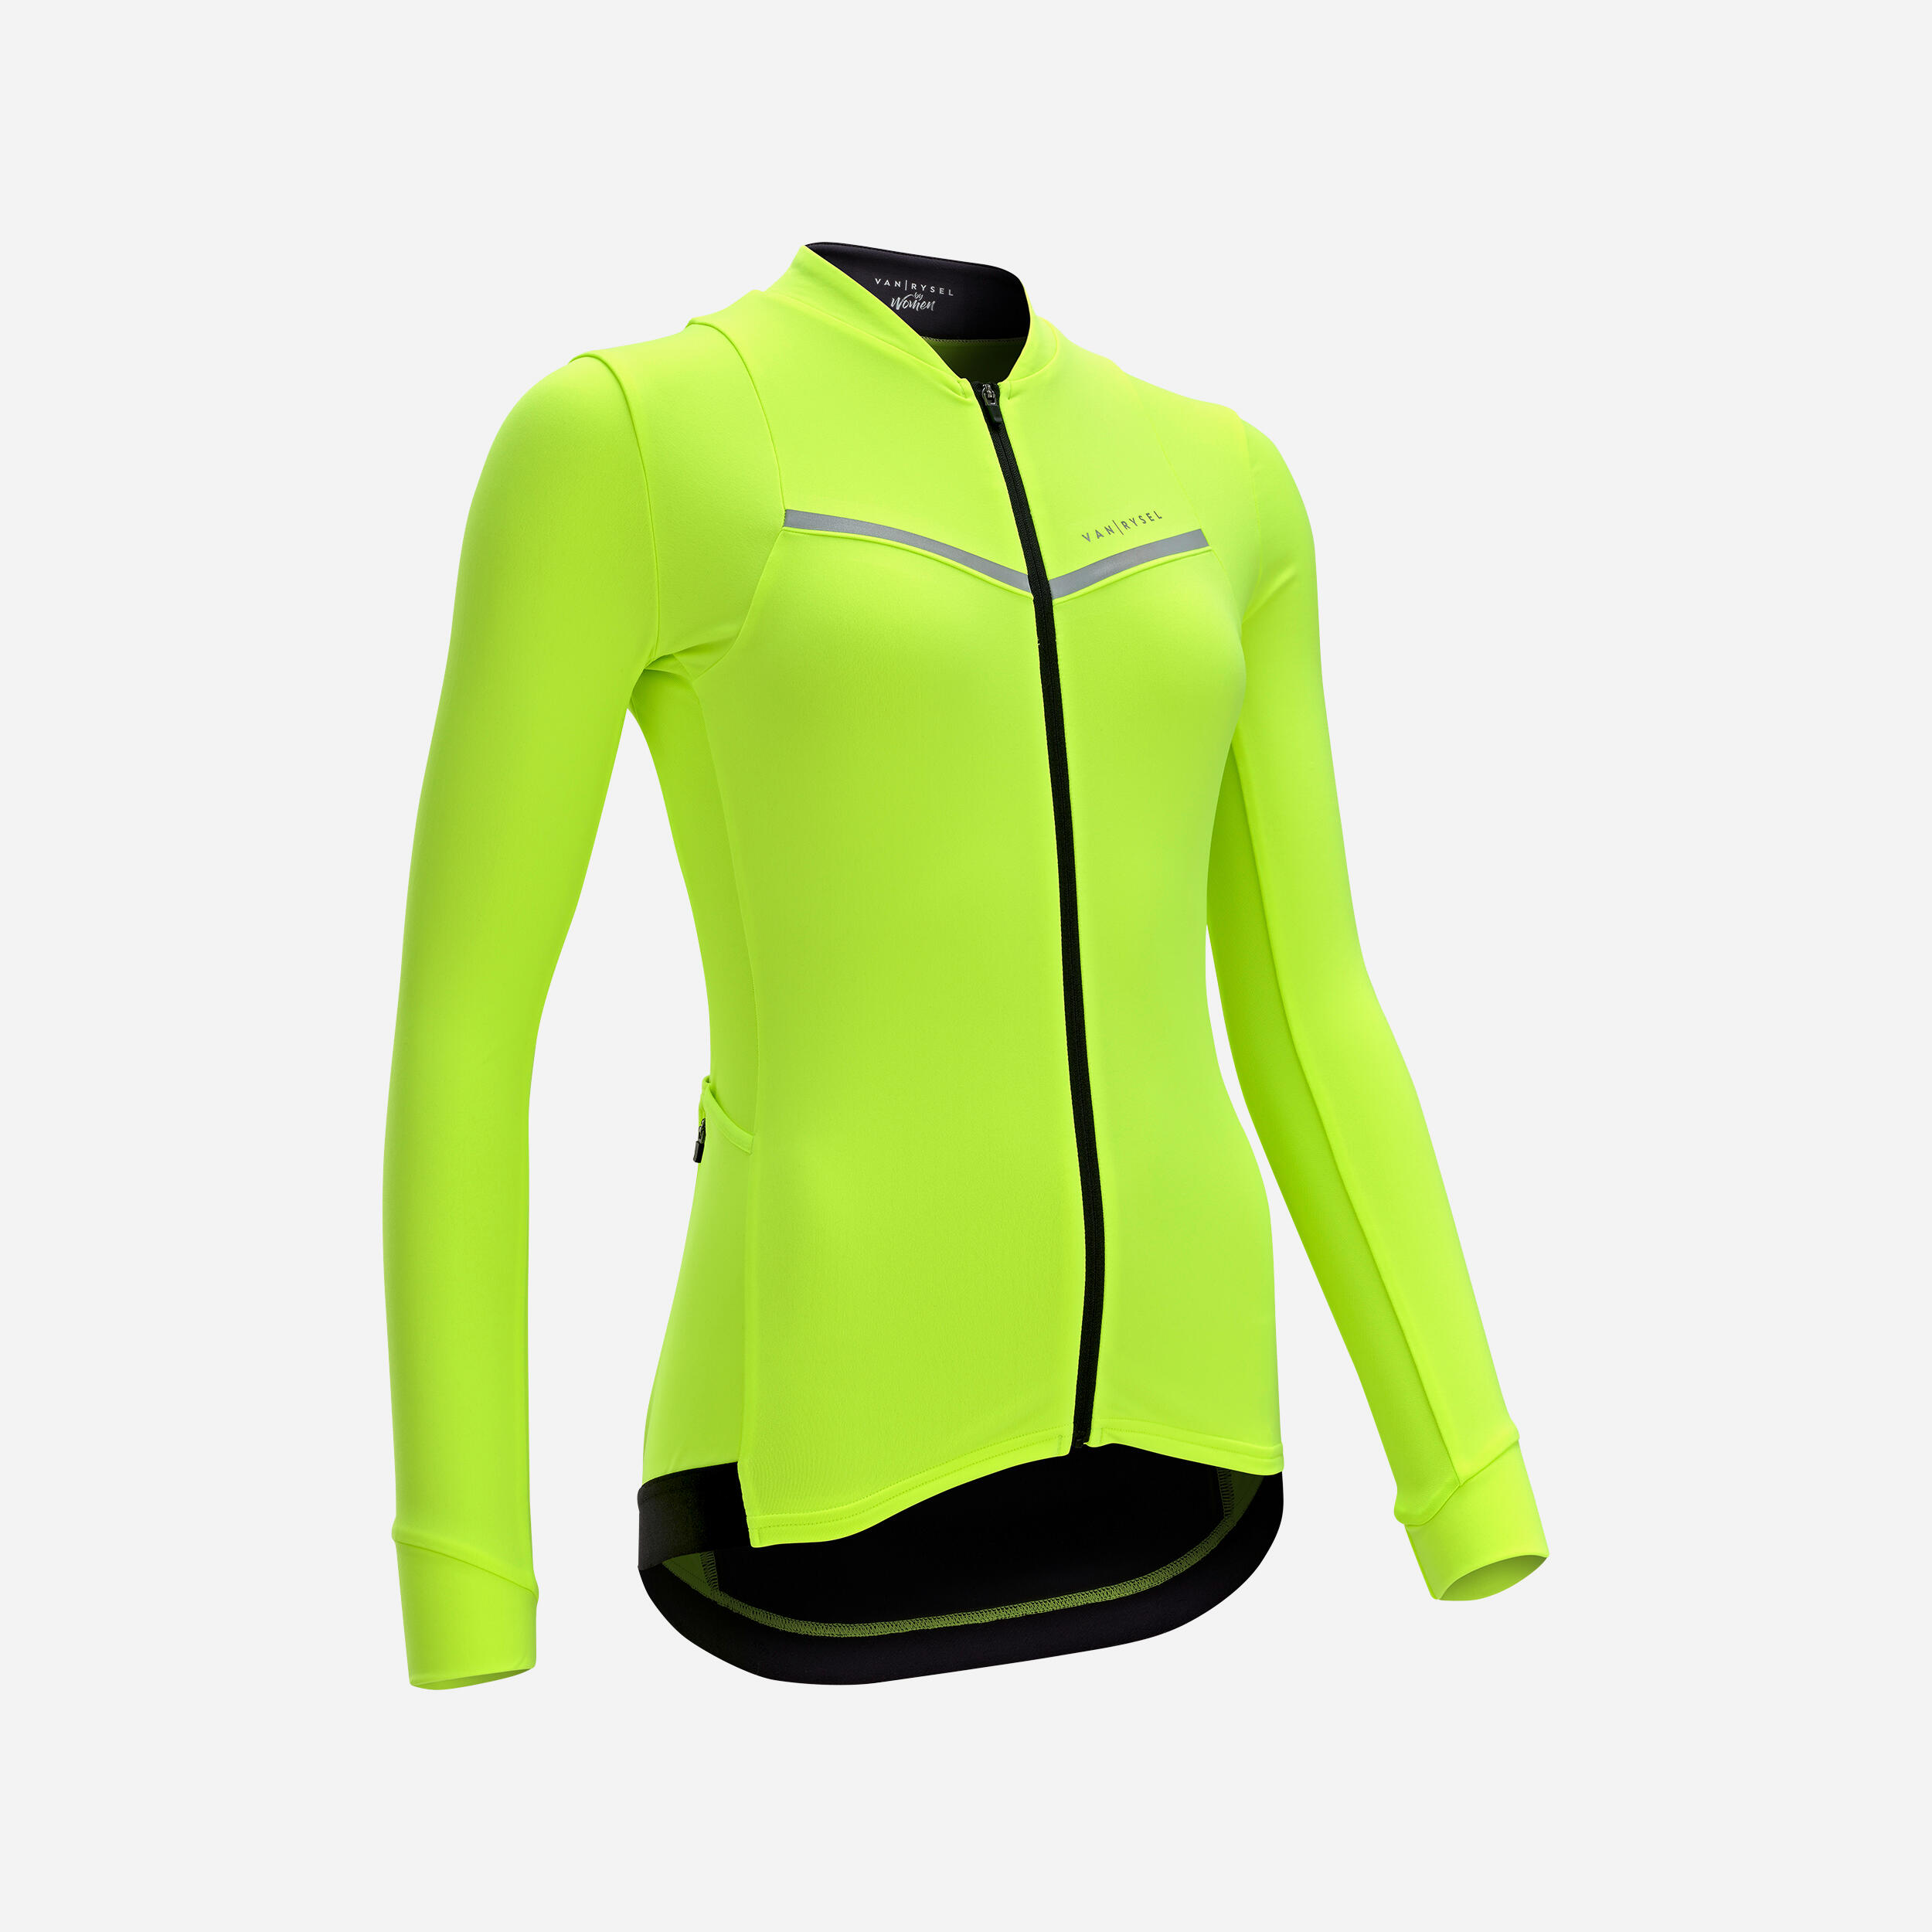 Women's Long-Sleeved Road Cycling Jersey - Yellow 1/7